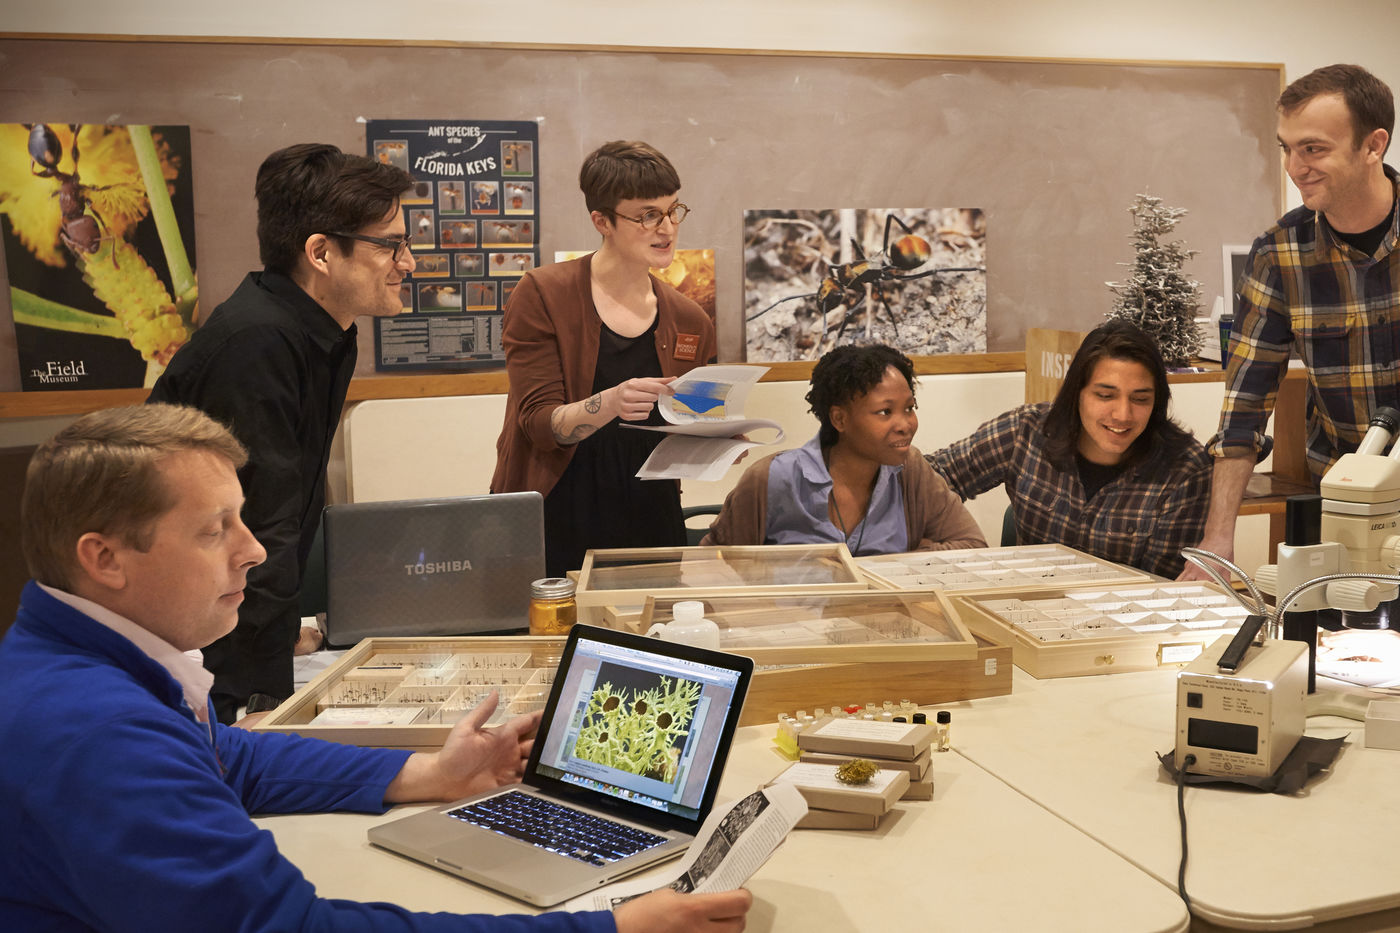 A group of scientists gather in a classroom to study and analyze specimens related to their research.